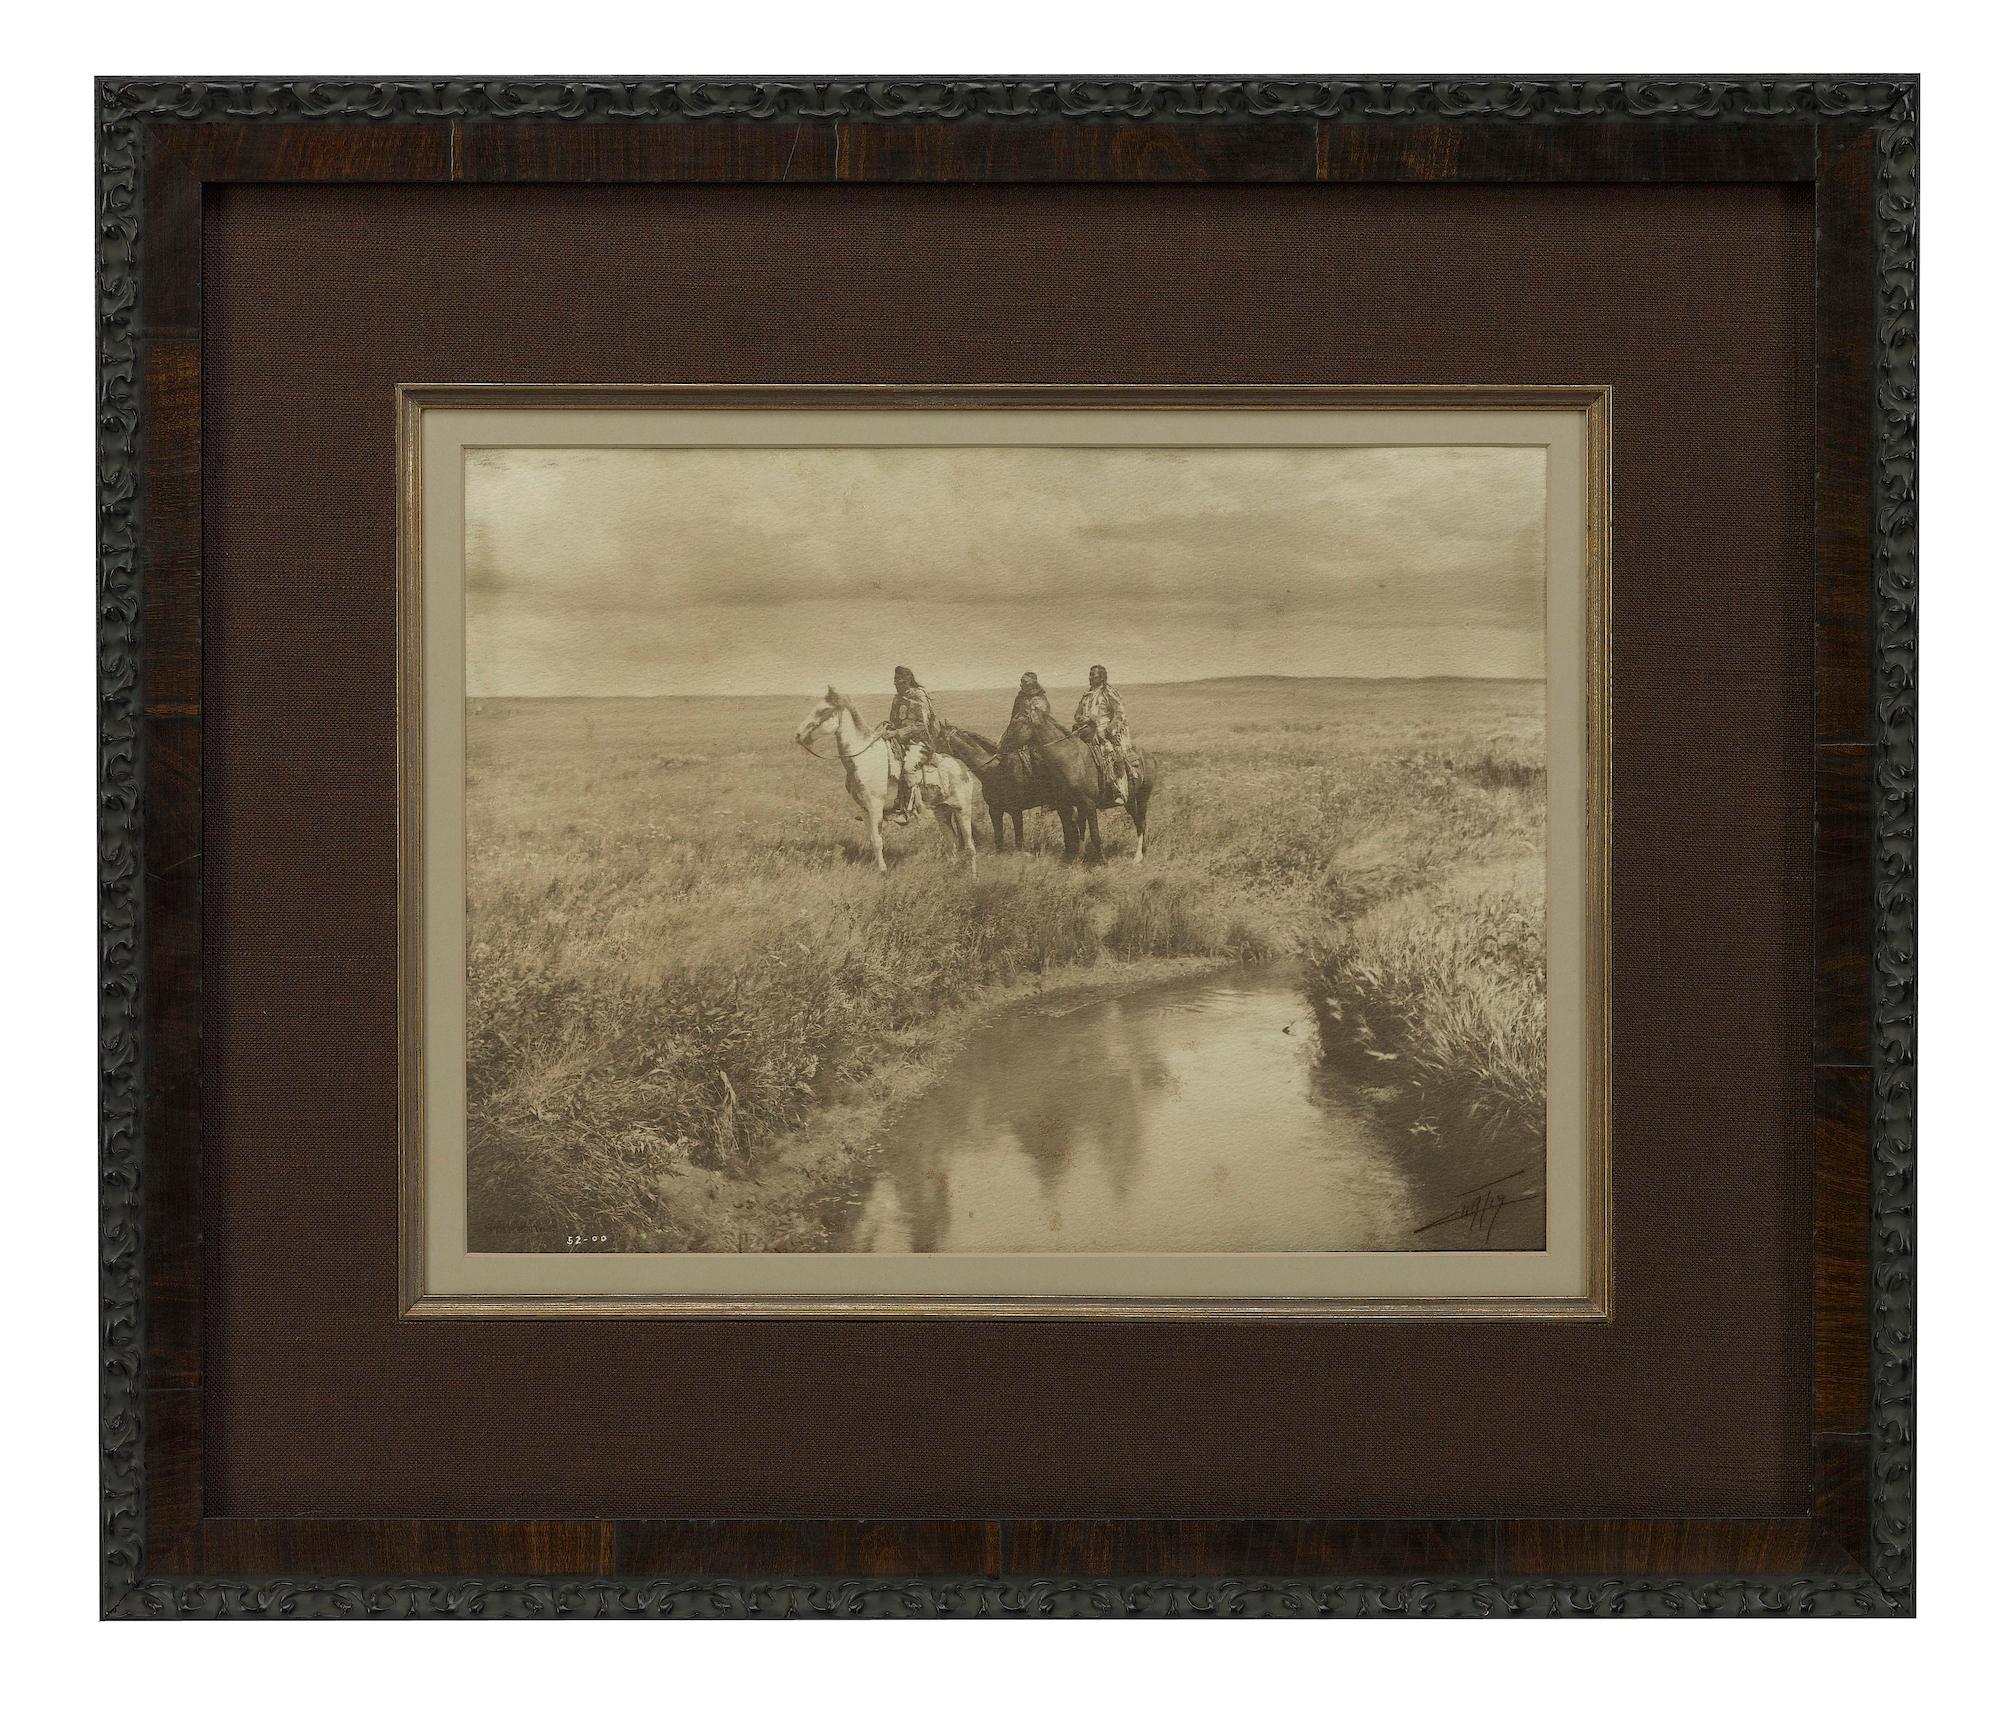 Presented is a rare, platinum Master Exhibition Print of Edward Curtis’ The Three Chiefs. Typical of Curtis’ Master Exhibition Prints, this platinum print is double-mounted, signed, with an embossed copyright credit and date stamp. His numeric